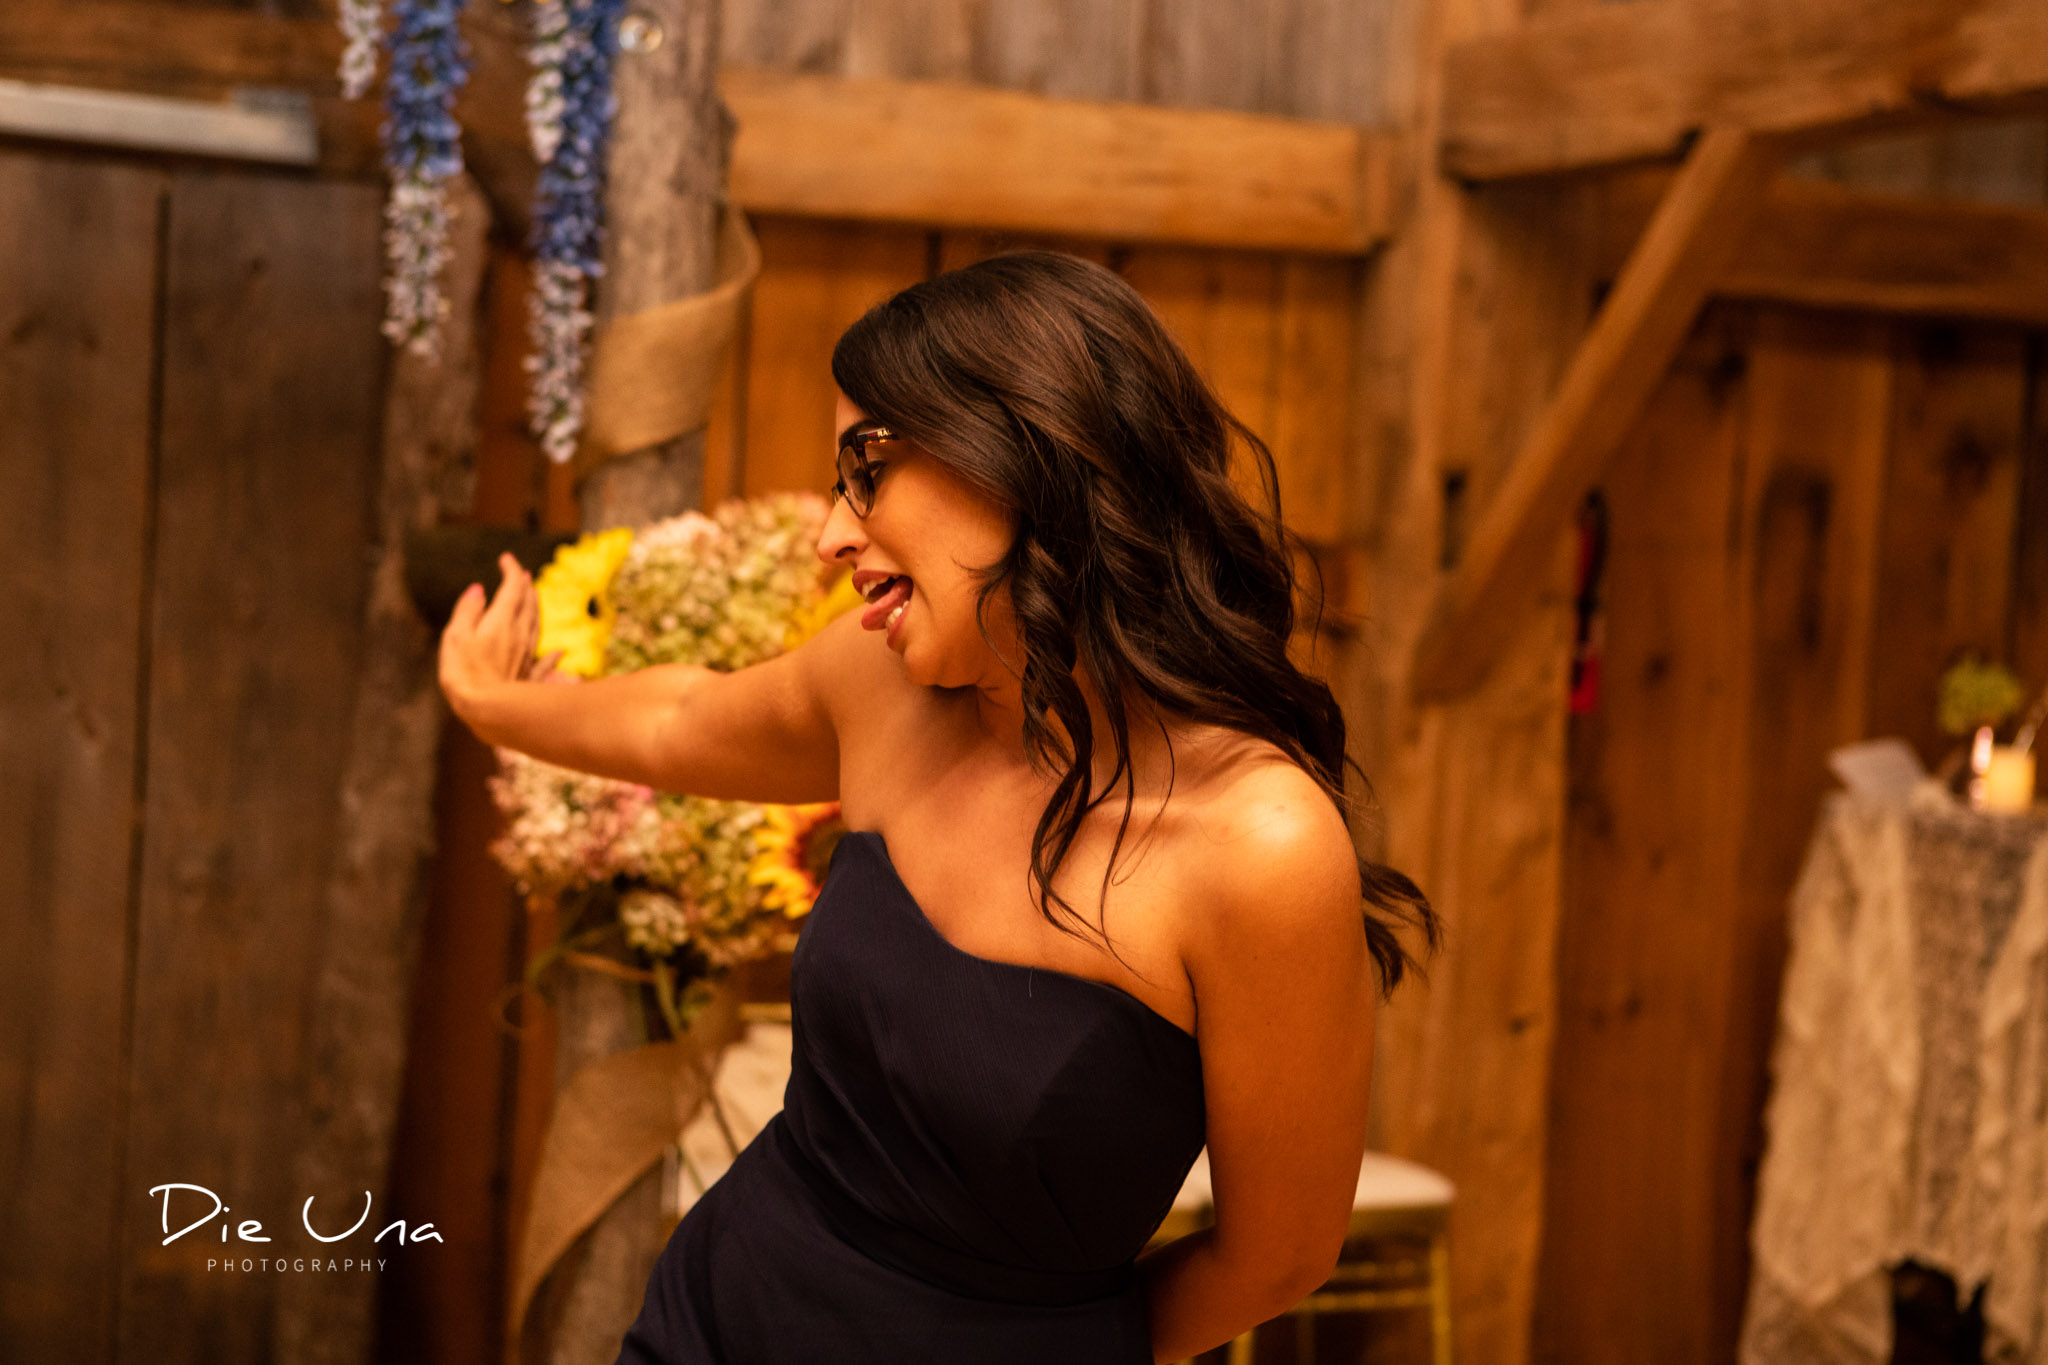 bridesmaid making a silly face during dance at wedding reception in a barn.jpg